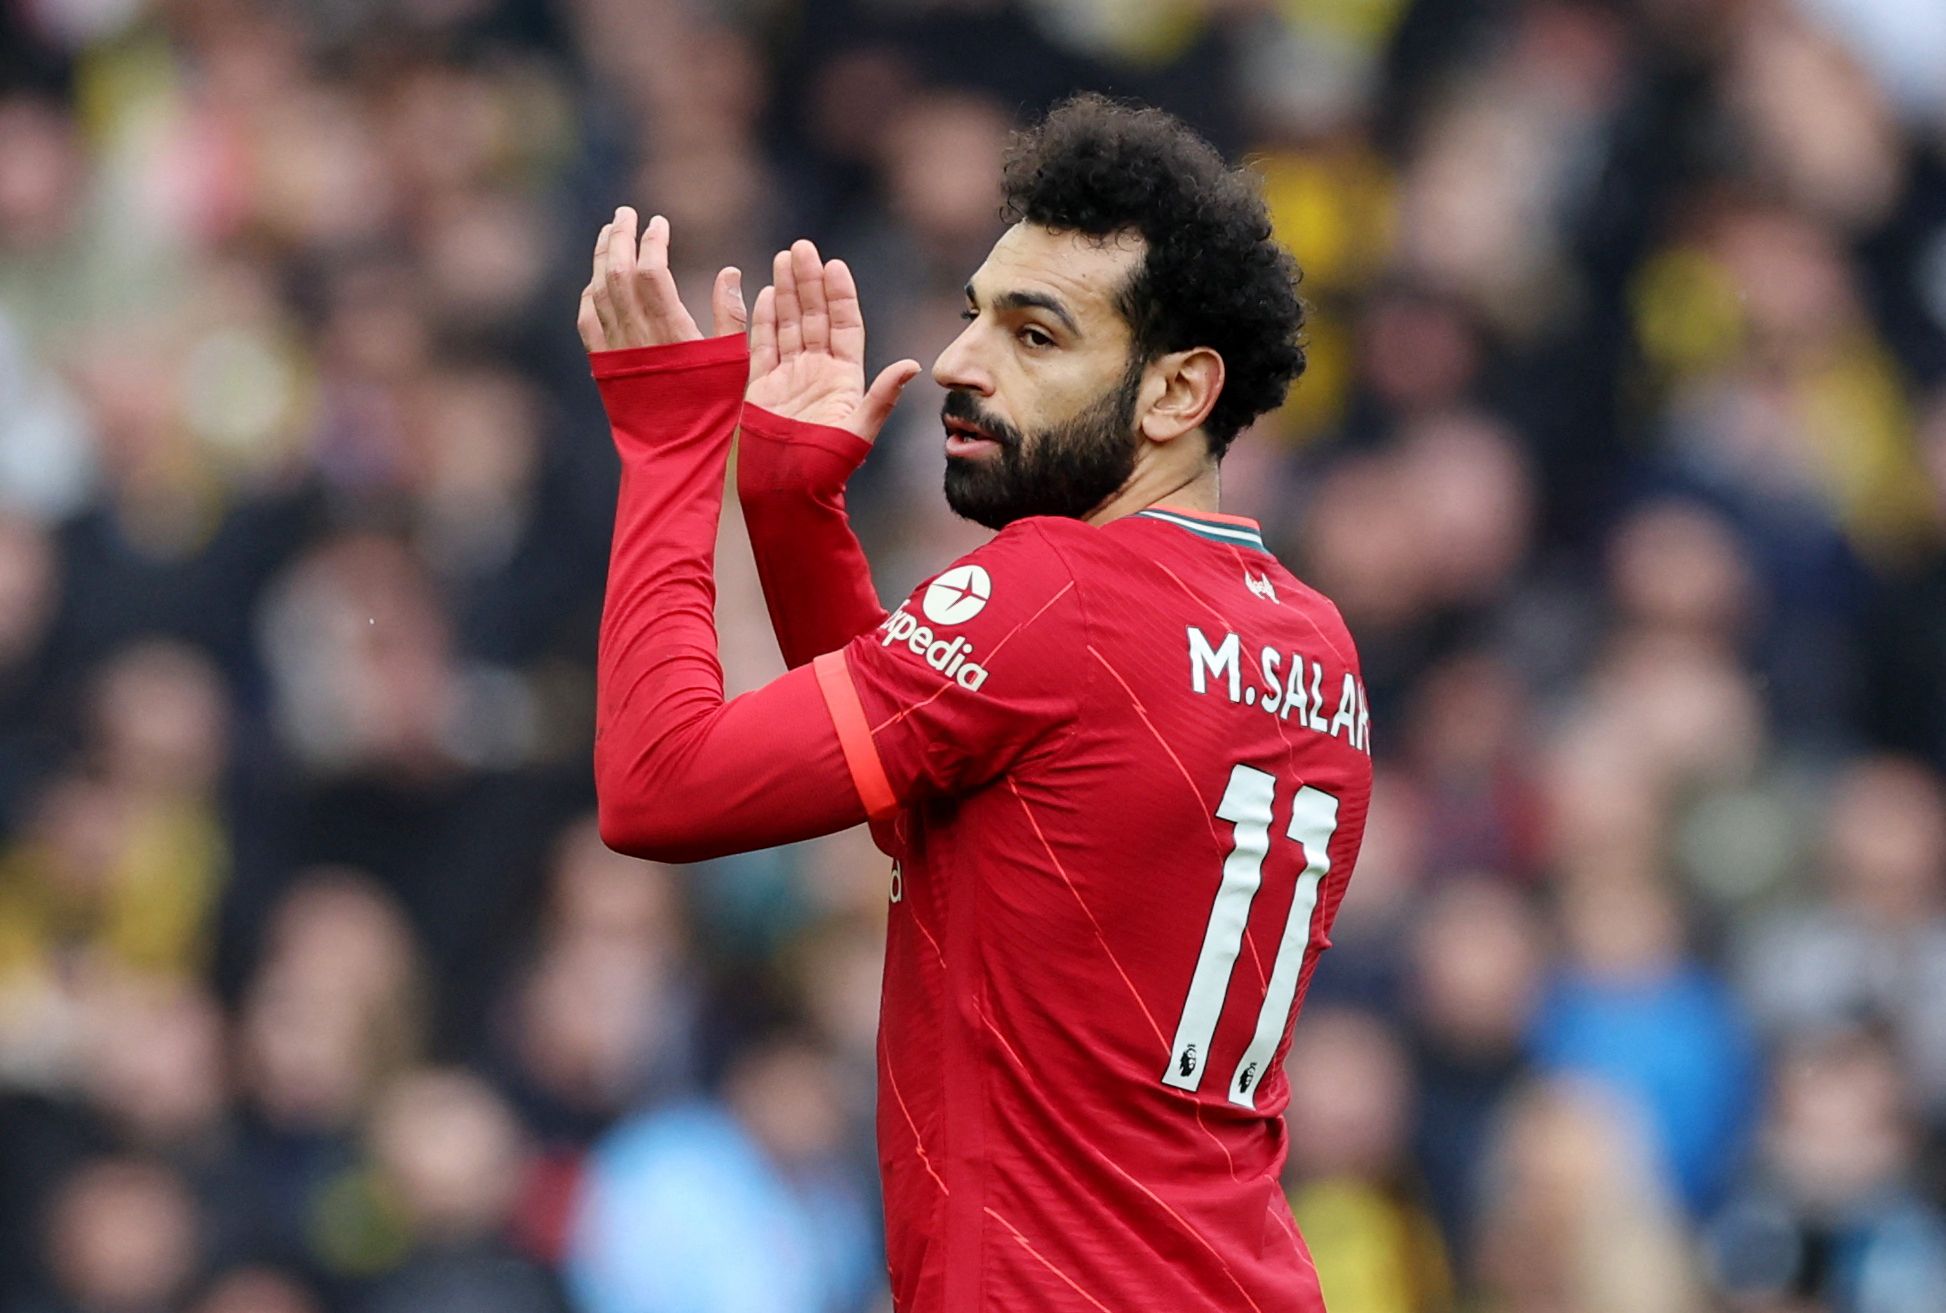 Mohamed Salah will leave Liverpool if he doesn’t accept the club’s latest £80m contract offer, claims former Scotland international Alan Hutton.